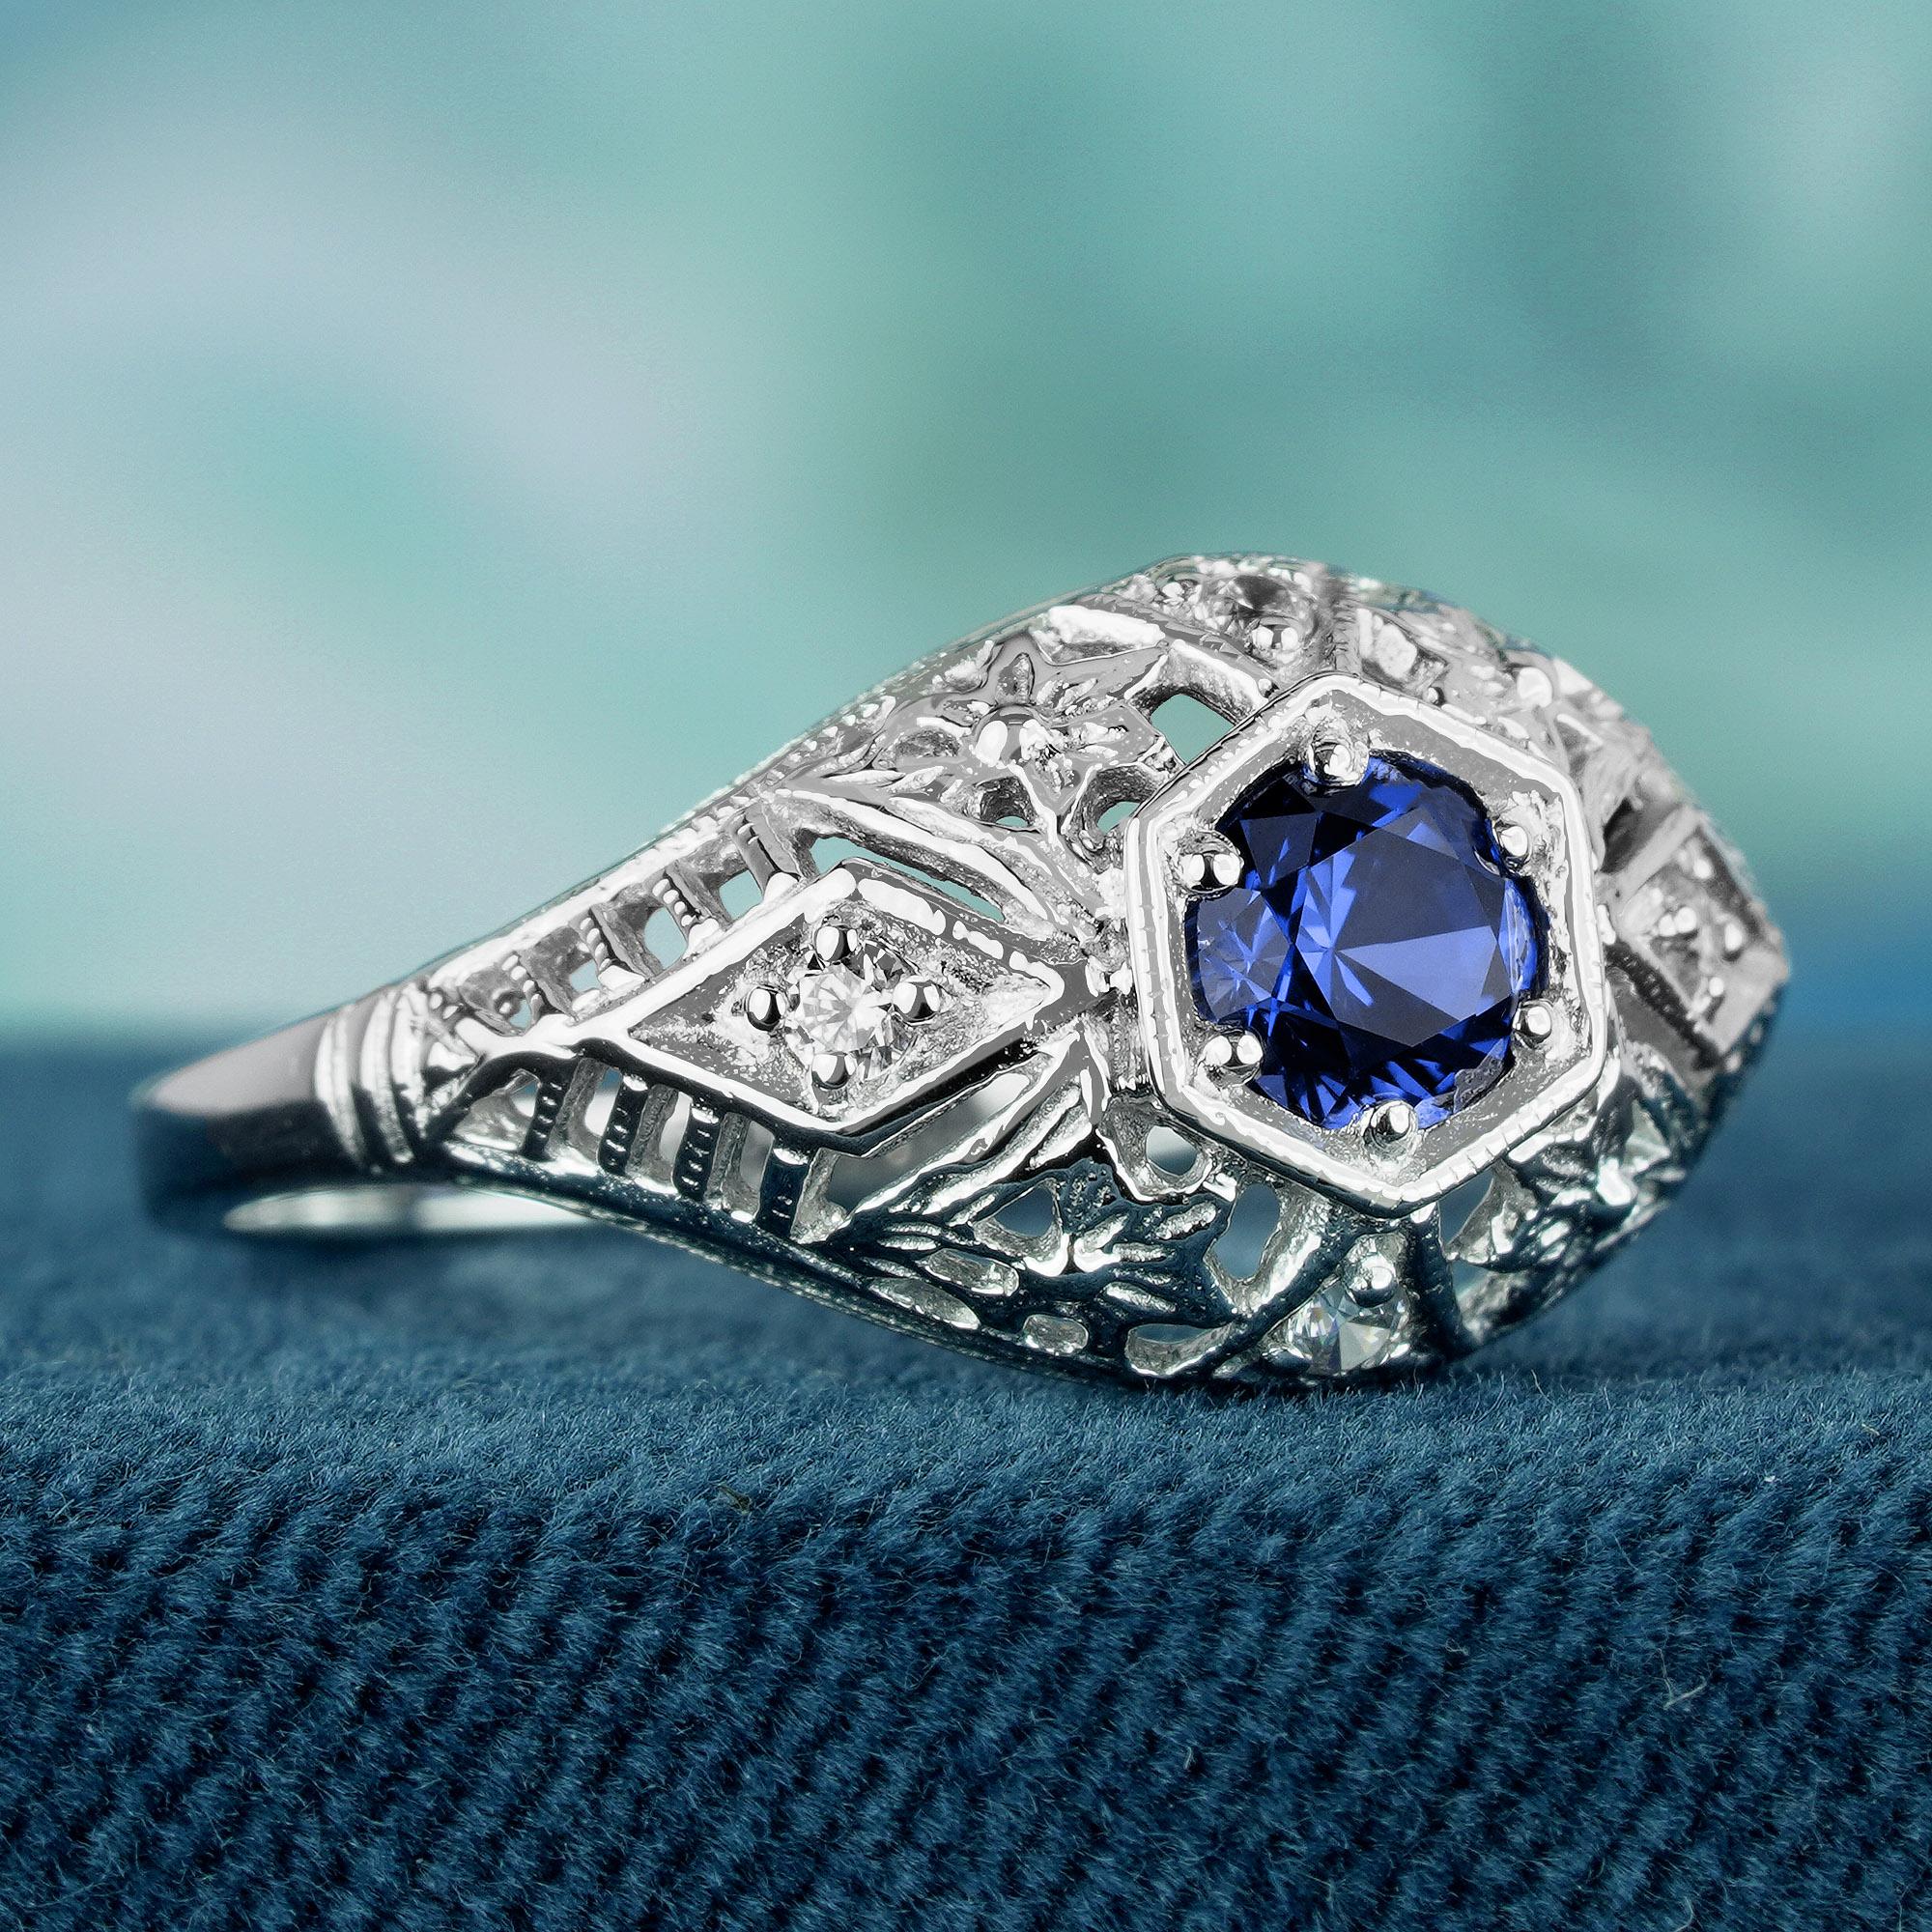 This vintage-inspired ring features a stunning natural blue sapphire as its centerpiece. The sapphire is surrounded by intricate filigree detailing in solid white gold, and multiple small diamonds add a touch of sparkle. The ring is reminiscent of